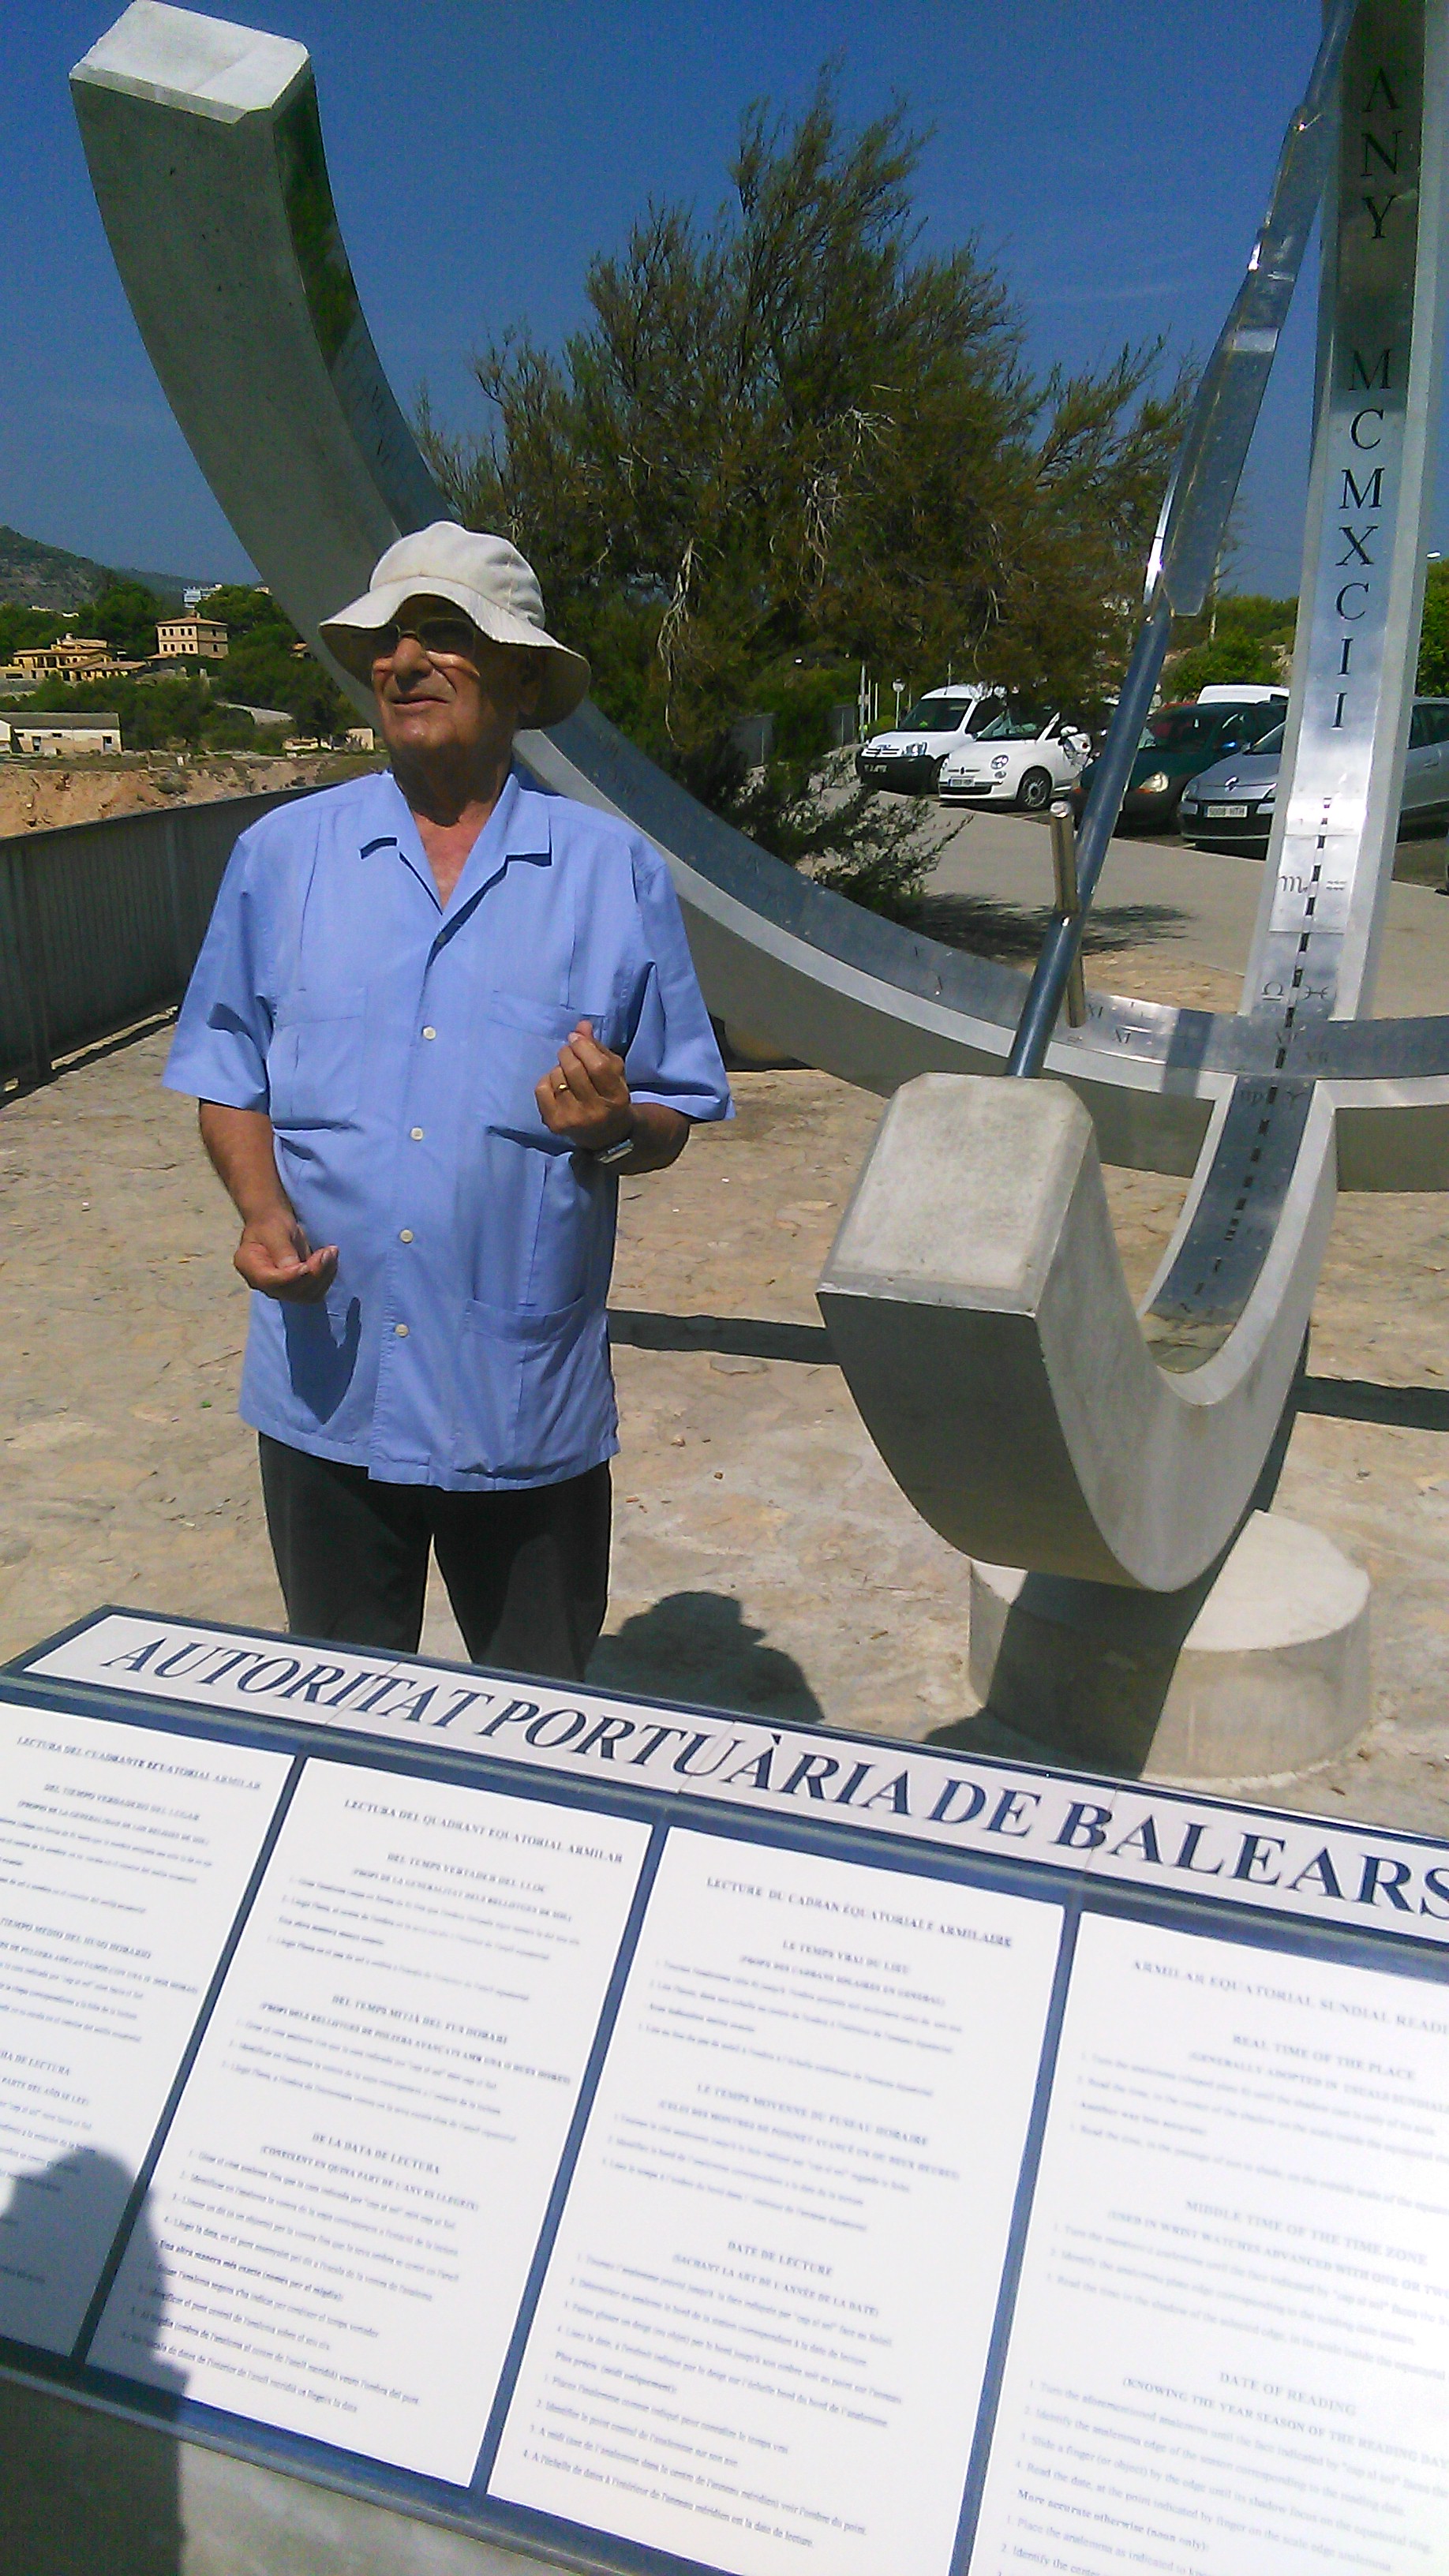 The APB presents new sundial in the Port of Palma